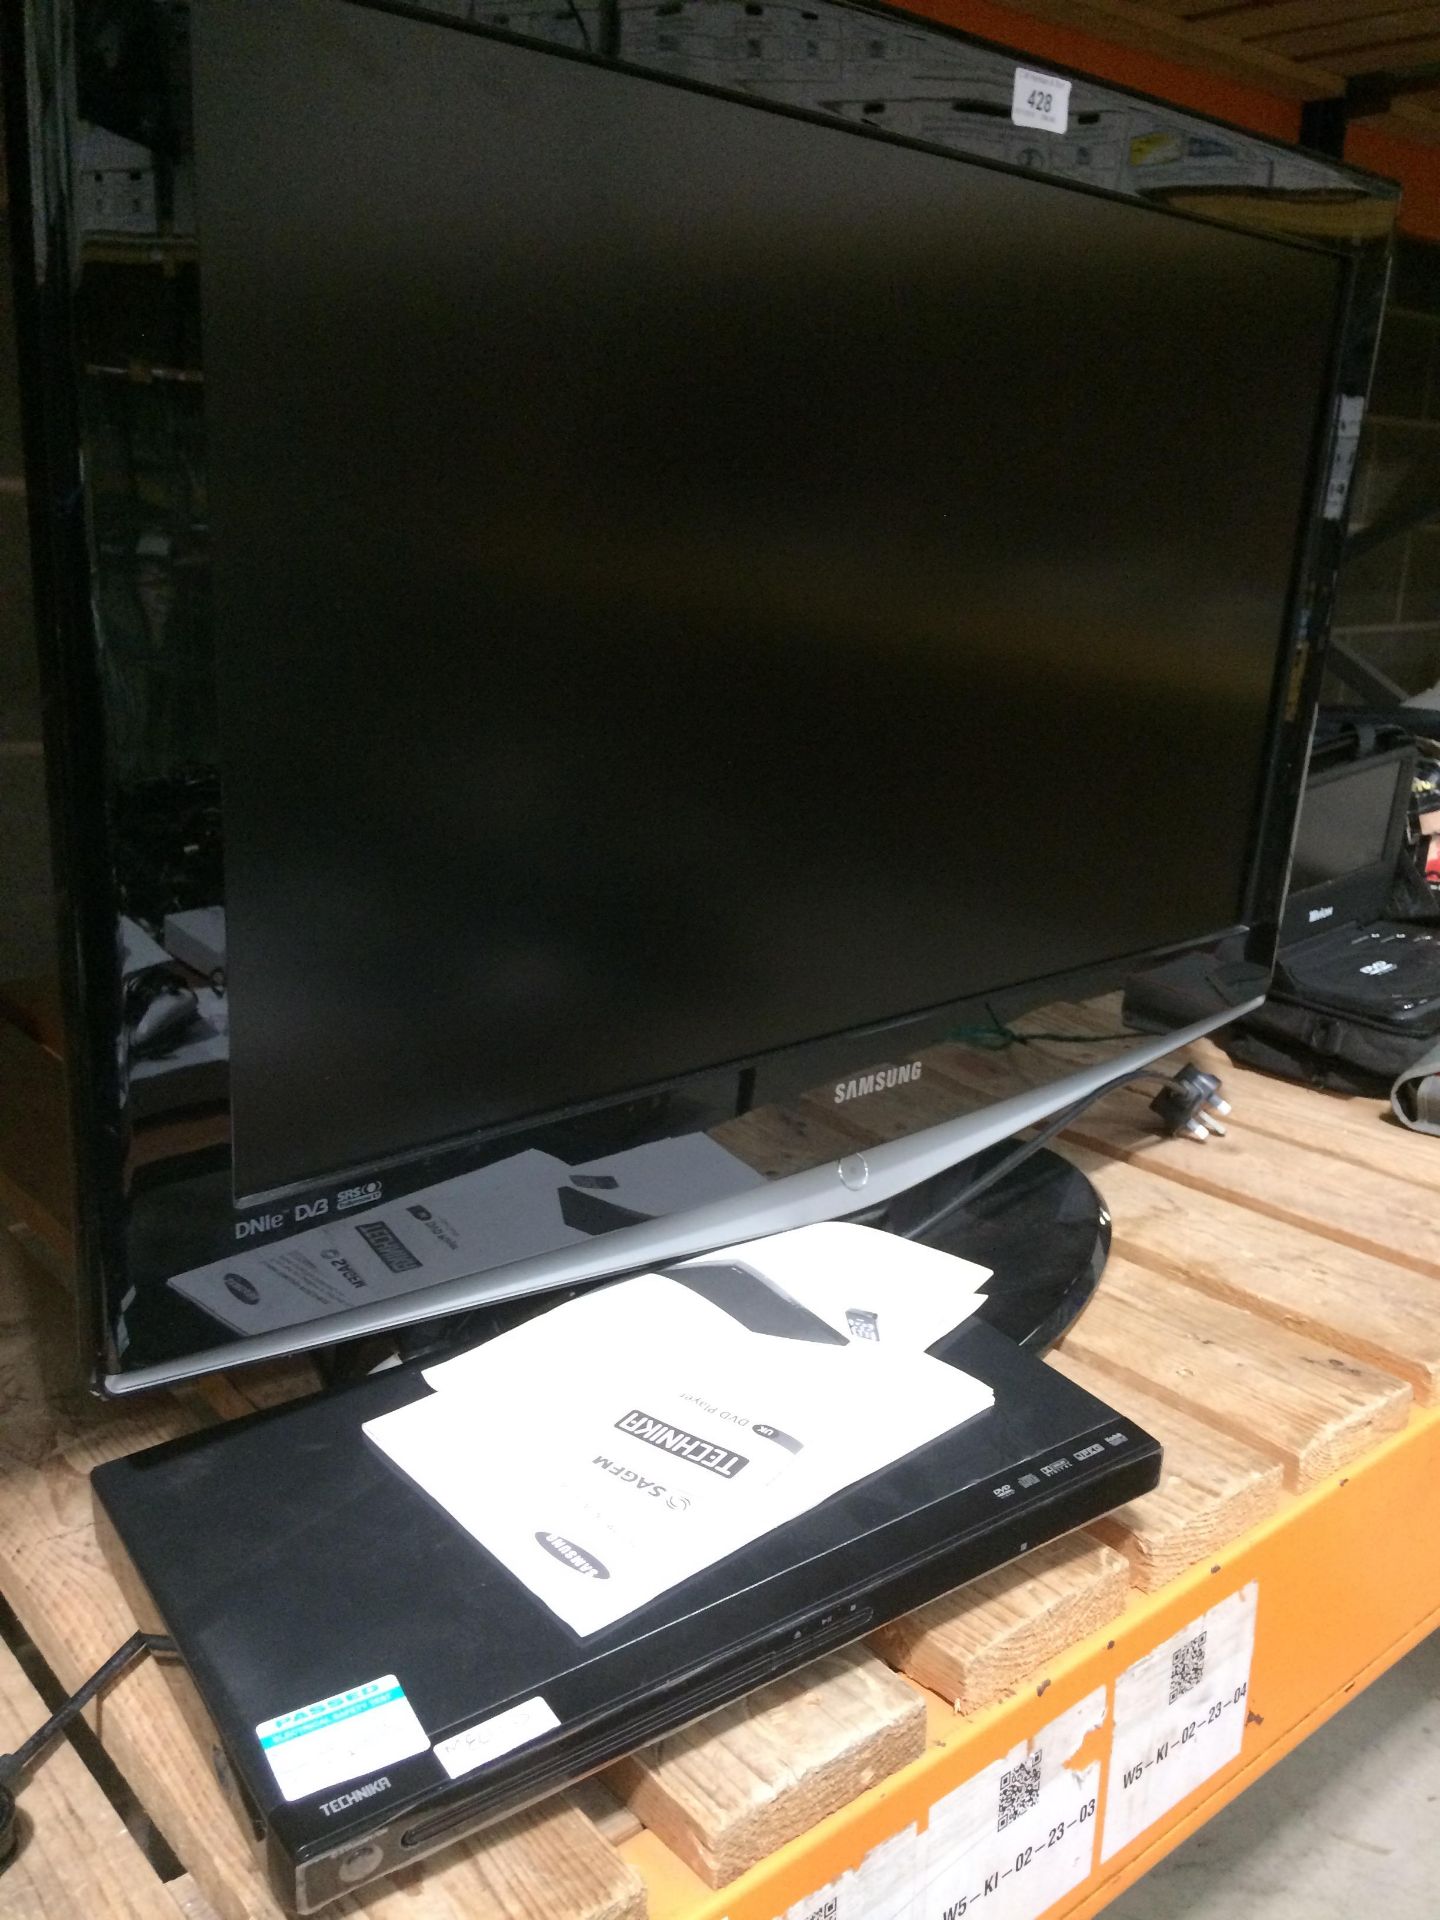 A Samsung LE32R74BD 32" LCD TV (with remote control),